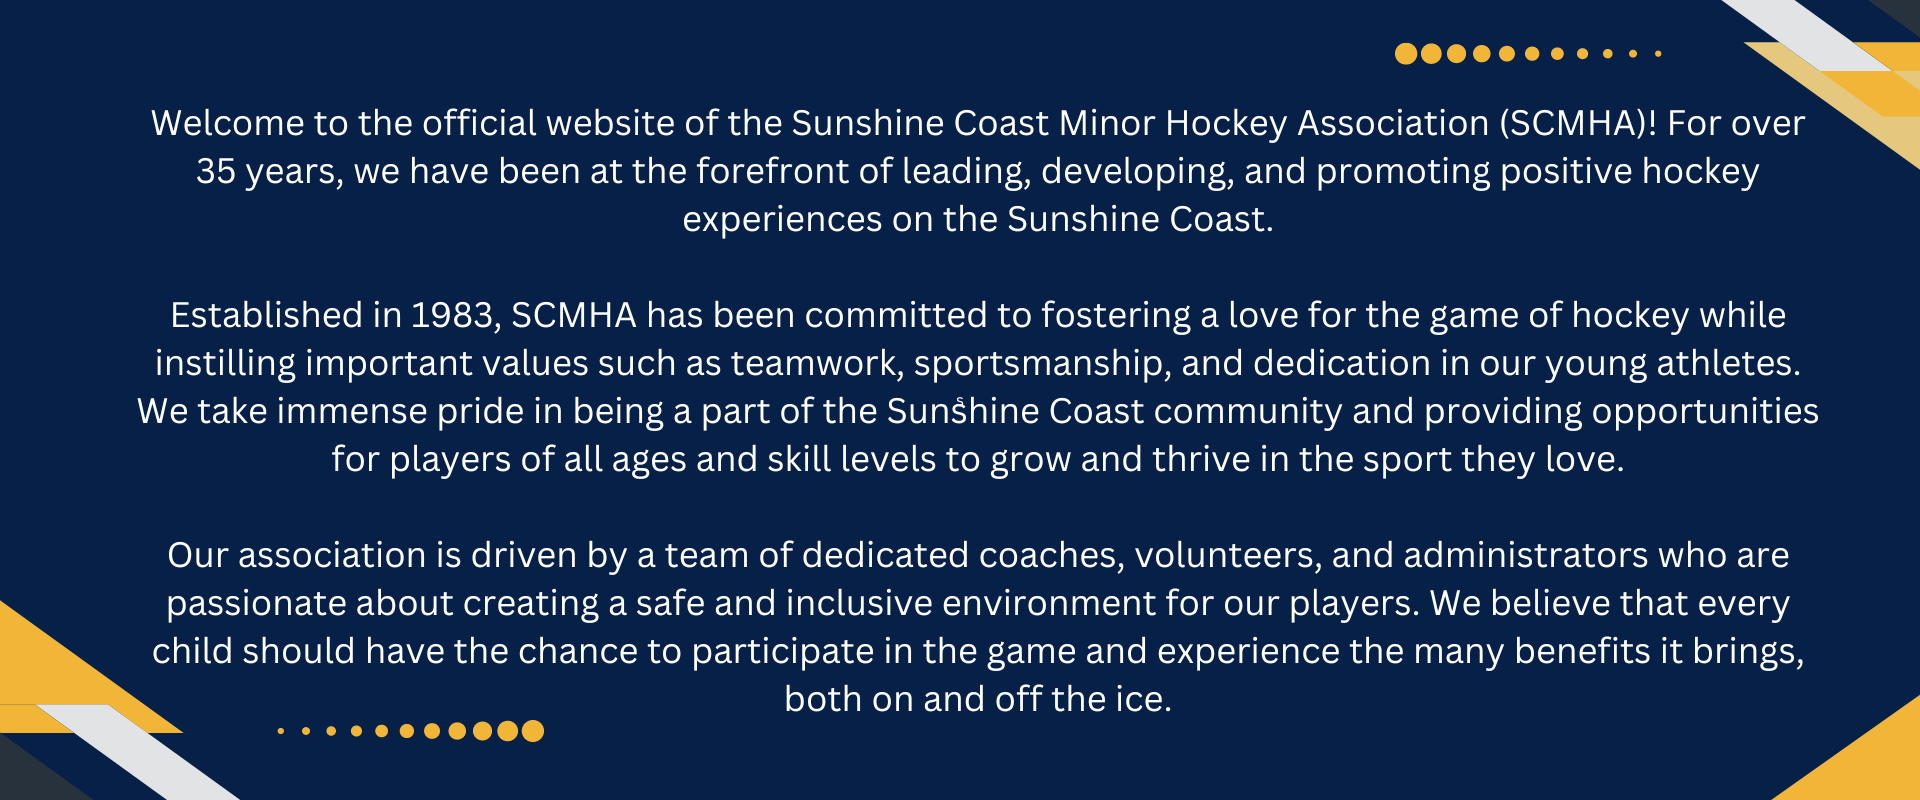 SCMHA Welcome Page